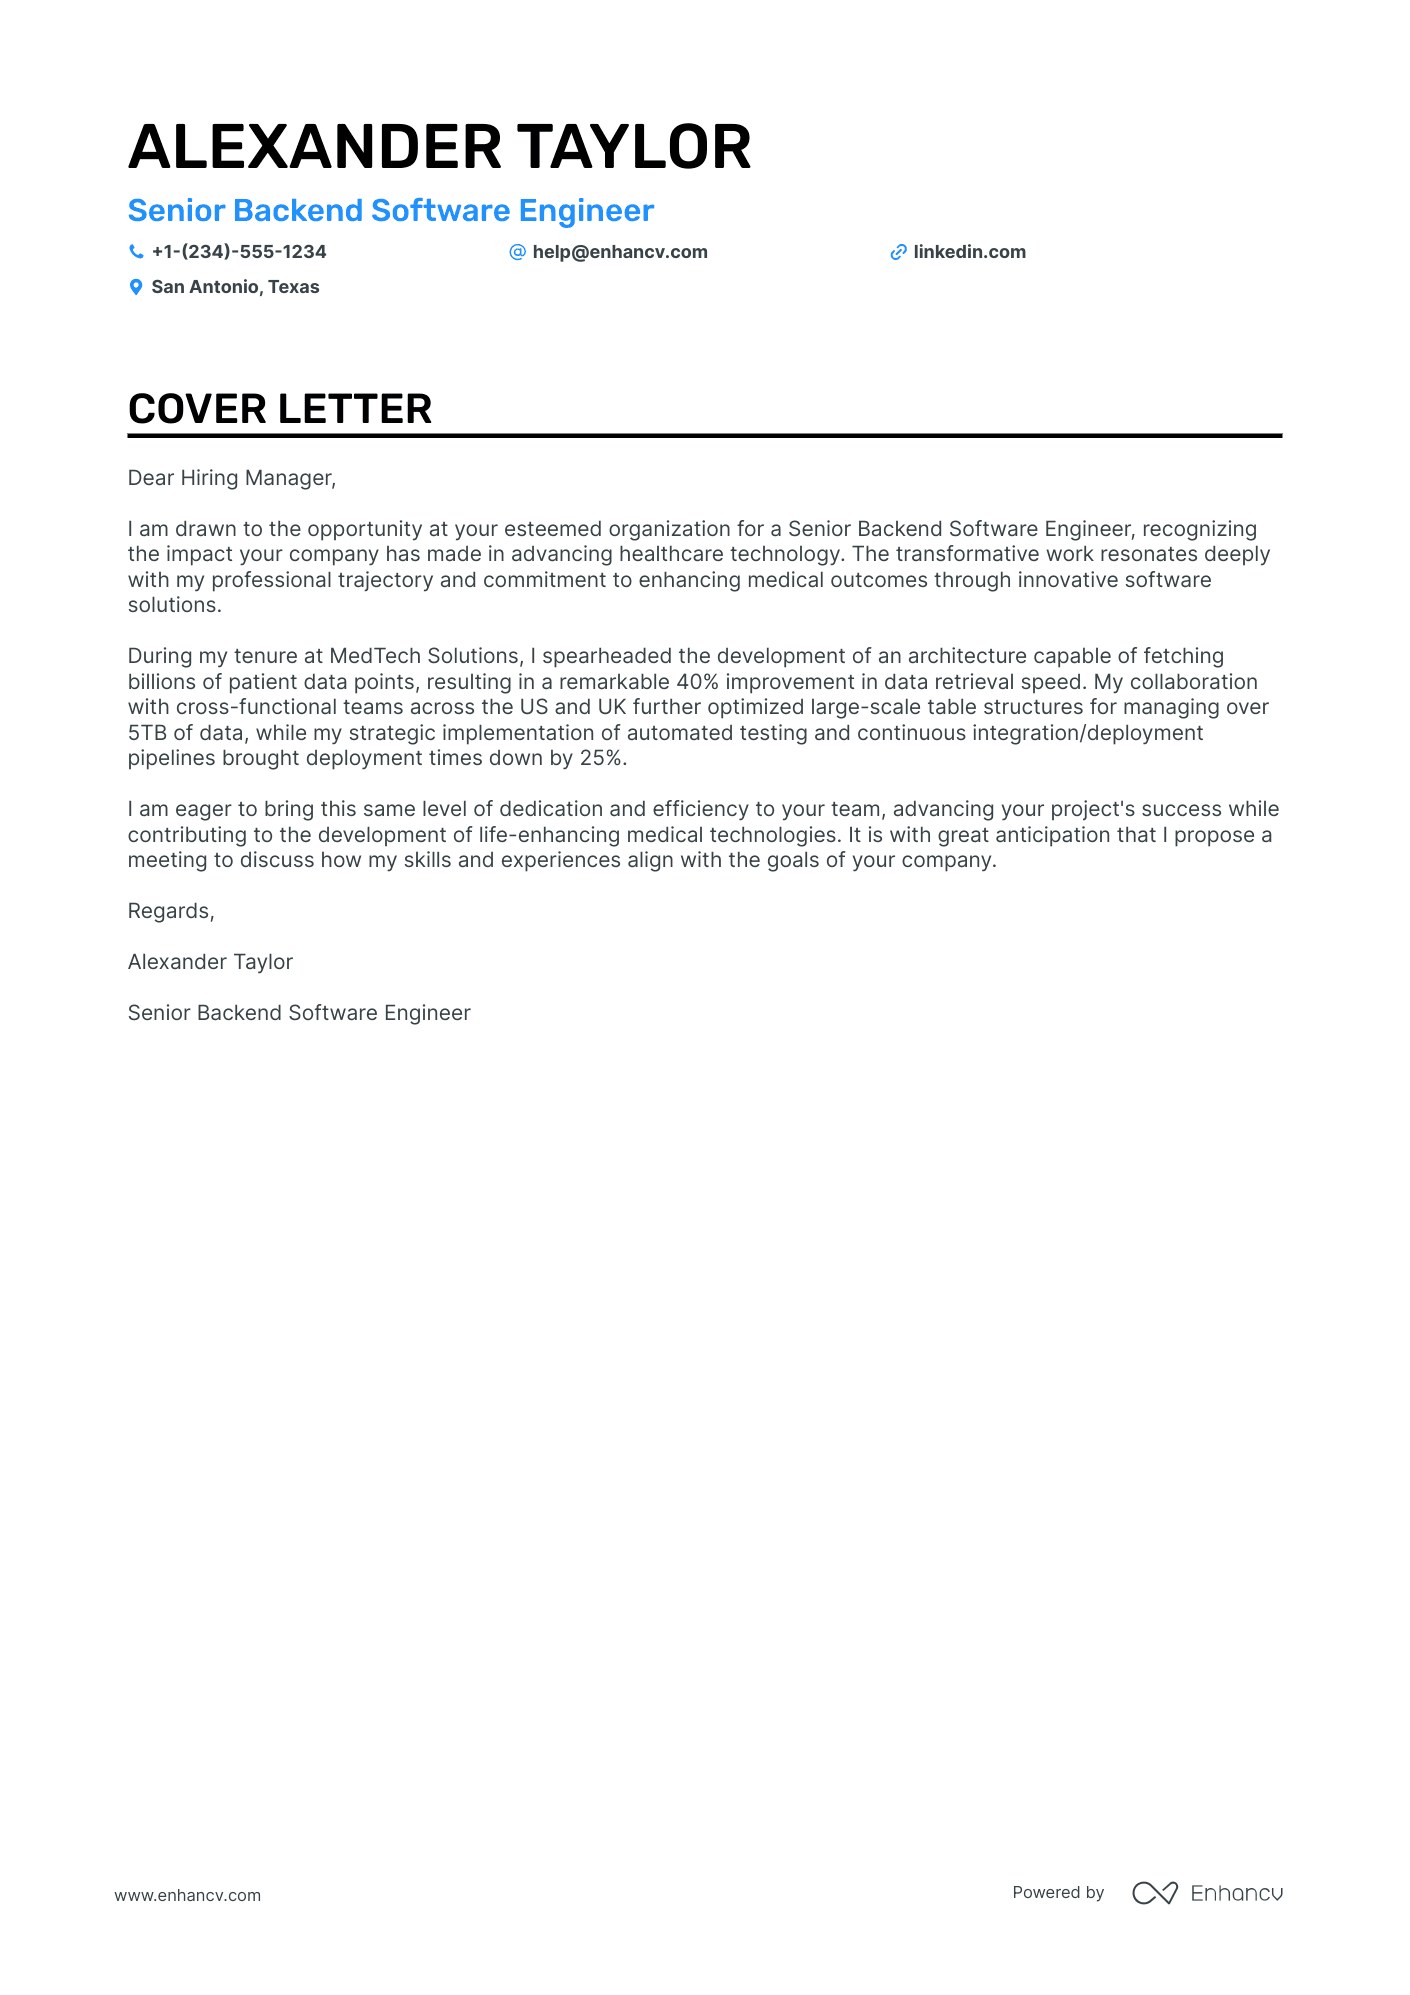 Solutions Engineer cover letter